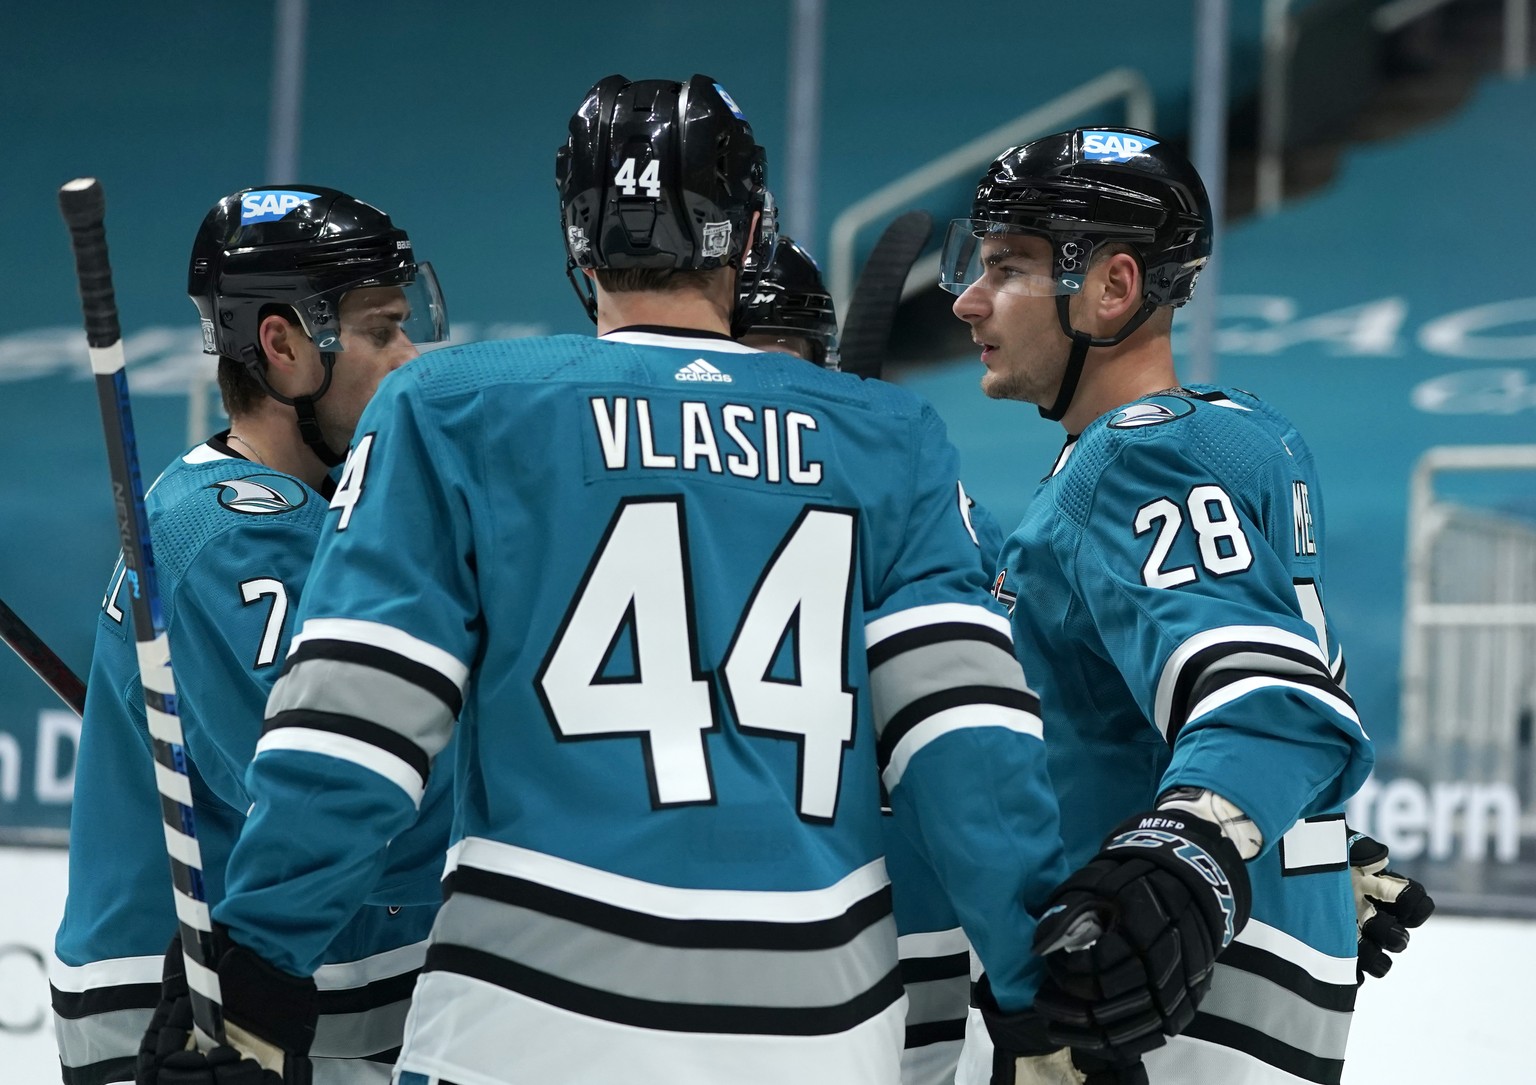 San Jose Sharks right wing Timo Meier (28) is congratulated by Marc-Edouard Vlasic (44) after scoring a goal against the St. Louis Blues during the first period of an NHL hockey game in San Jose, Cali ...